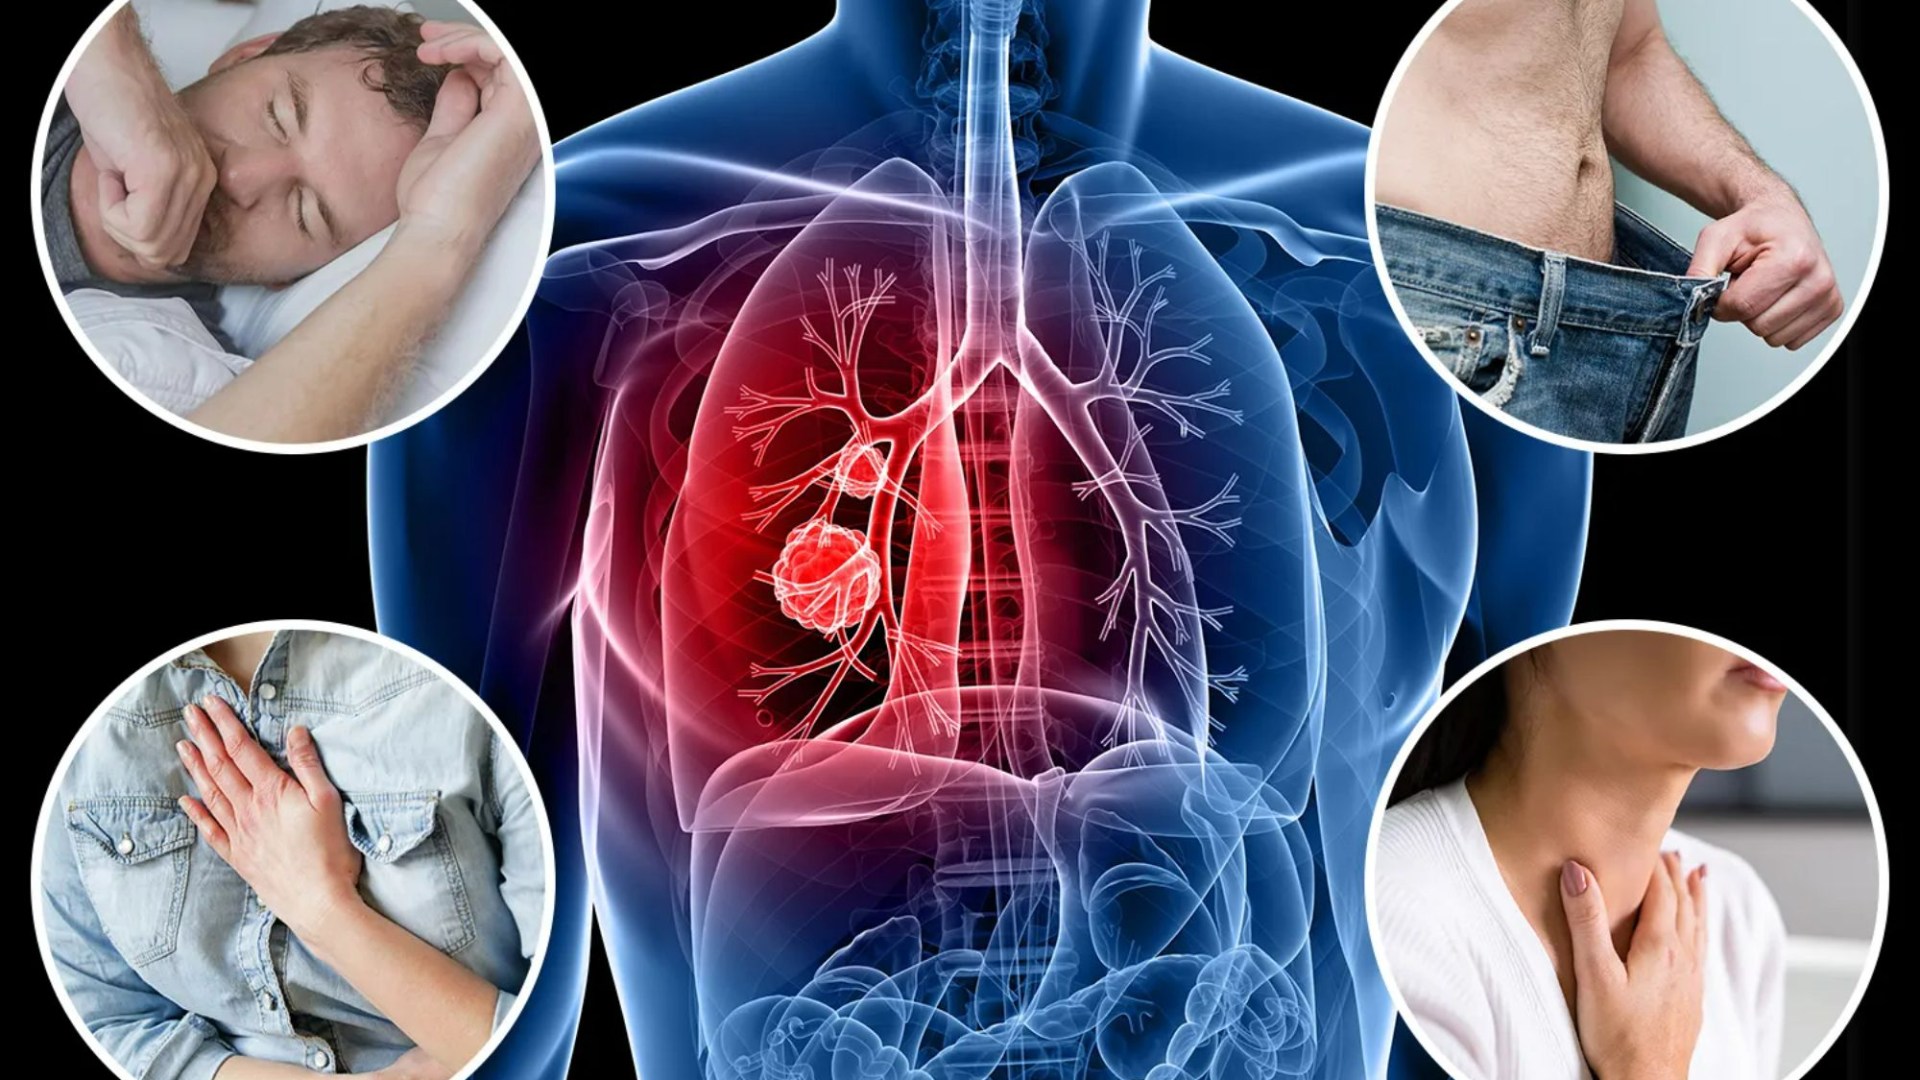 The 12 lung cancer symptoms commonly found in patients who have never smoked [Video]